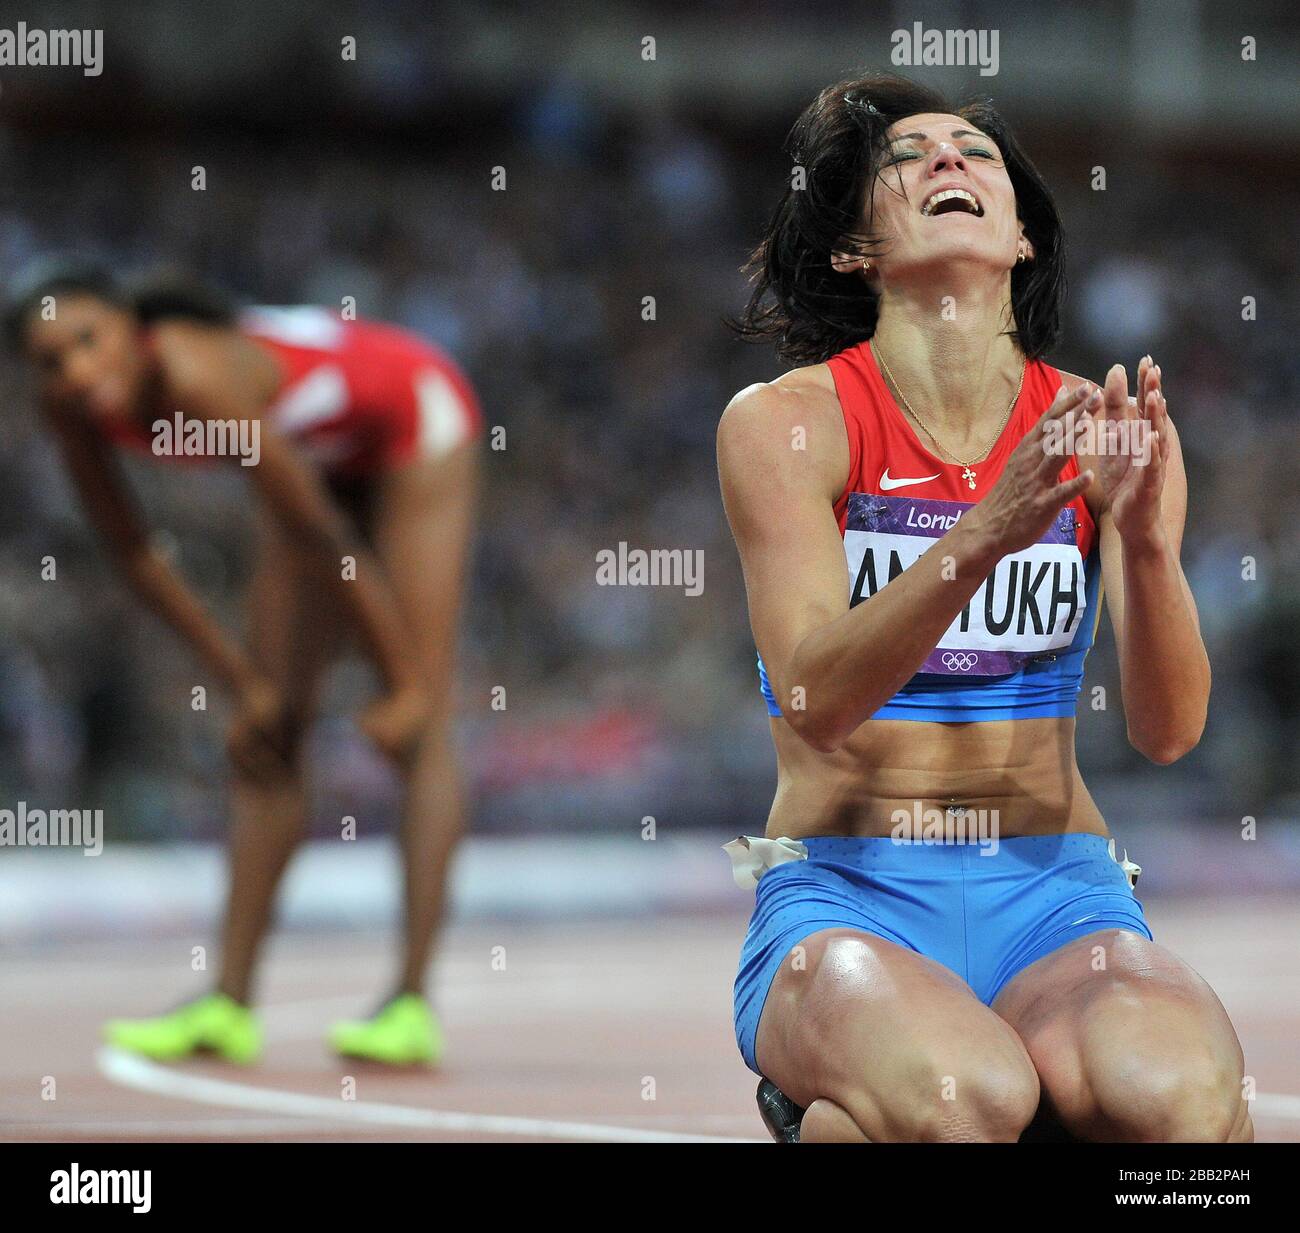 Russia's Natalya Antyukh celebrates winning the gold medal during the Women's 400m Hurdles, on the 12th day of the London 2012 Olympics at The Olympic Stadium. Stock Photo